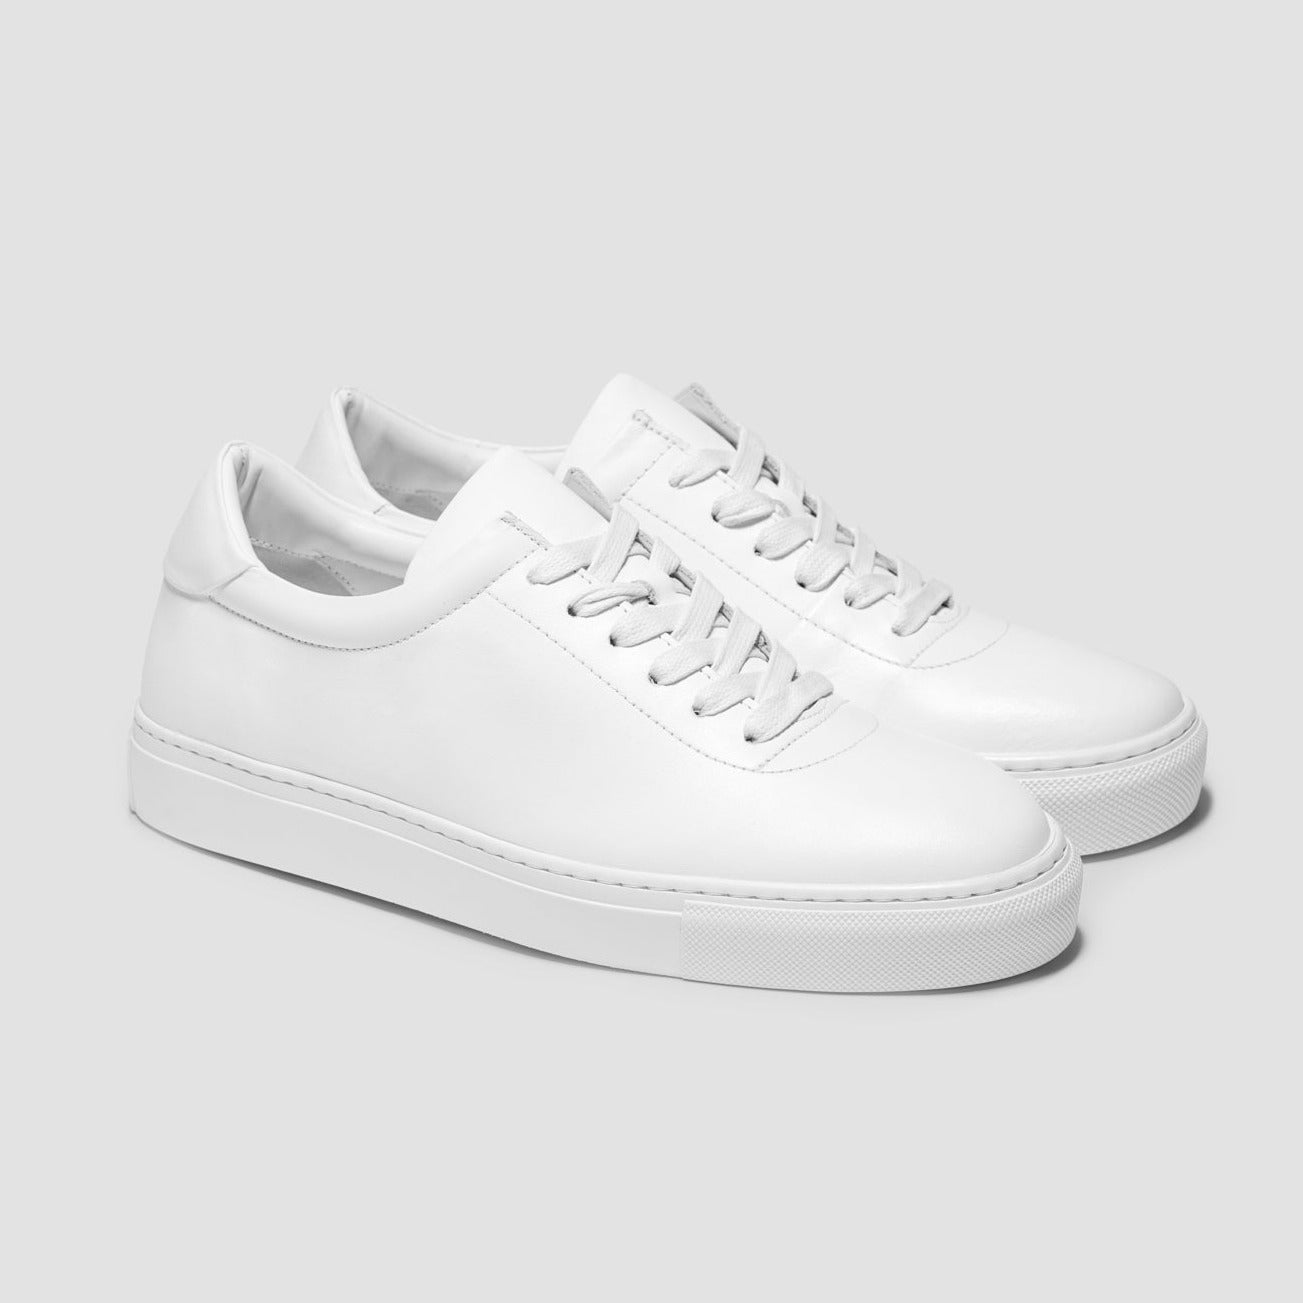 Buy Bacca Bucci® Multiverse Sneakers/Casual Shoe That Change its Color  Changing Sneakers for Men- White, Size UK6 at Amazon.in